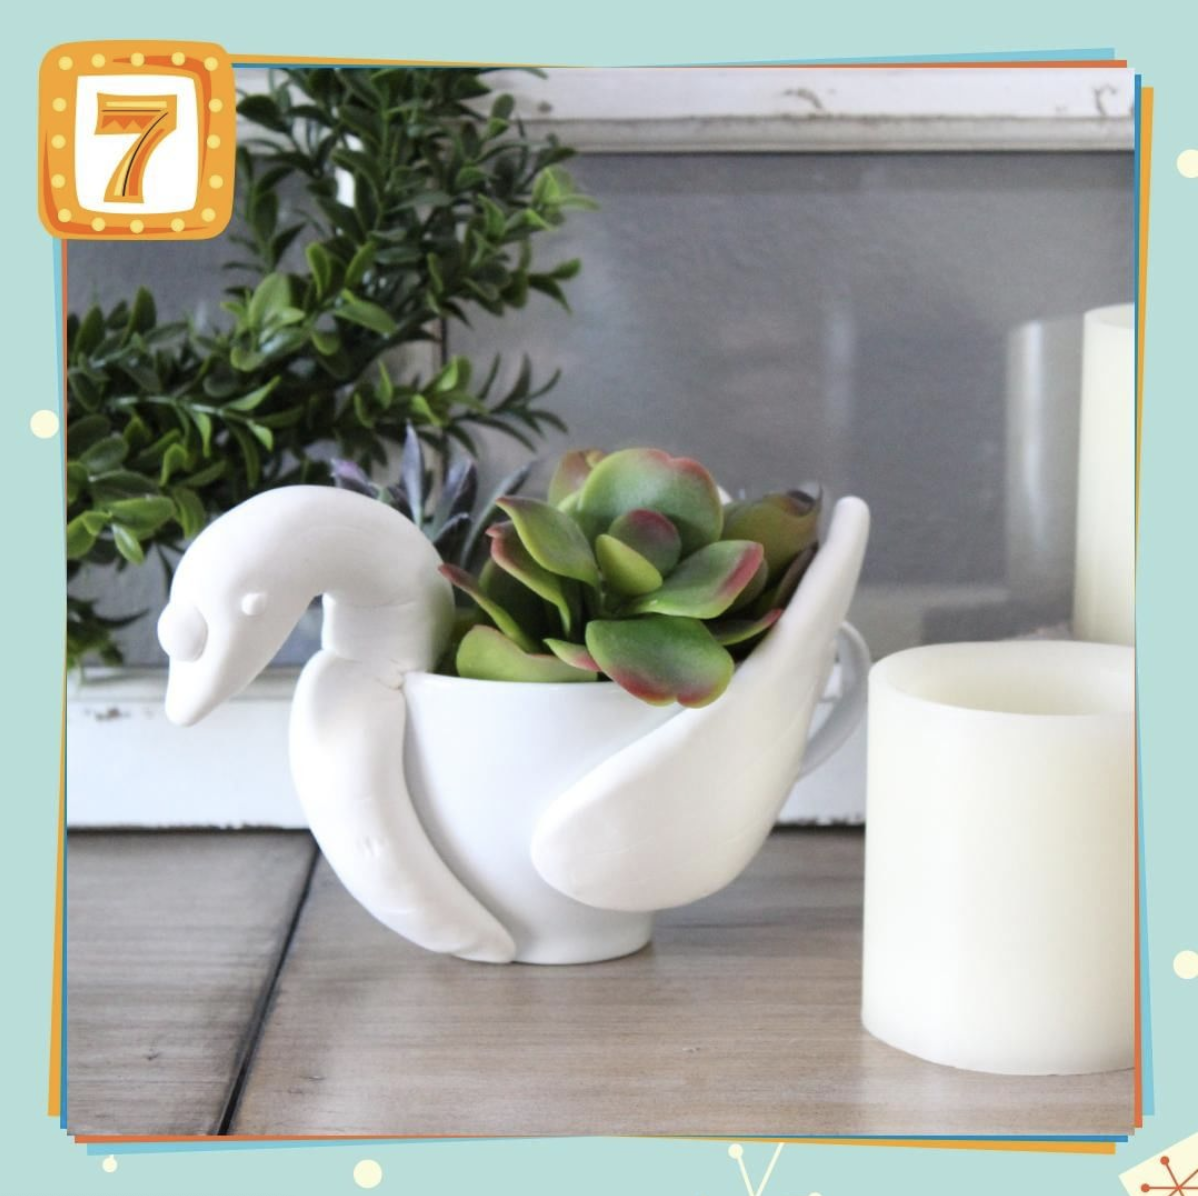 🎵On the 7th day of Christmas 🎵… @creativegreenliving designed #DIY swans-a-swimming for the #ChristmasPriceIndex. Swans cost $13,125 this year, but how about making these planters yourself instead?